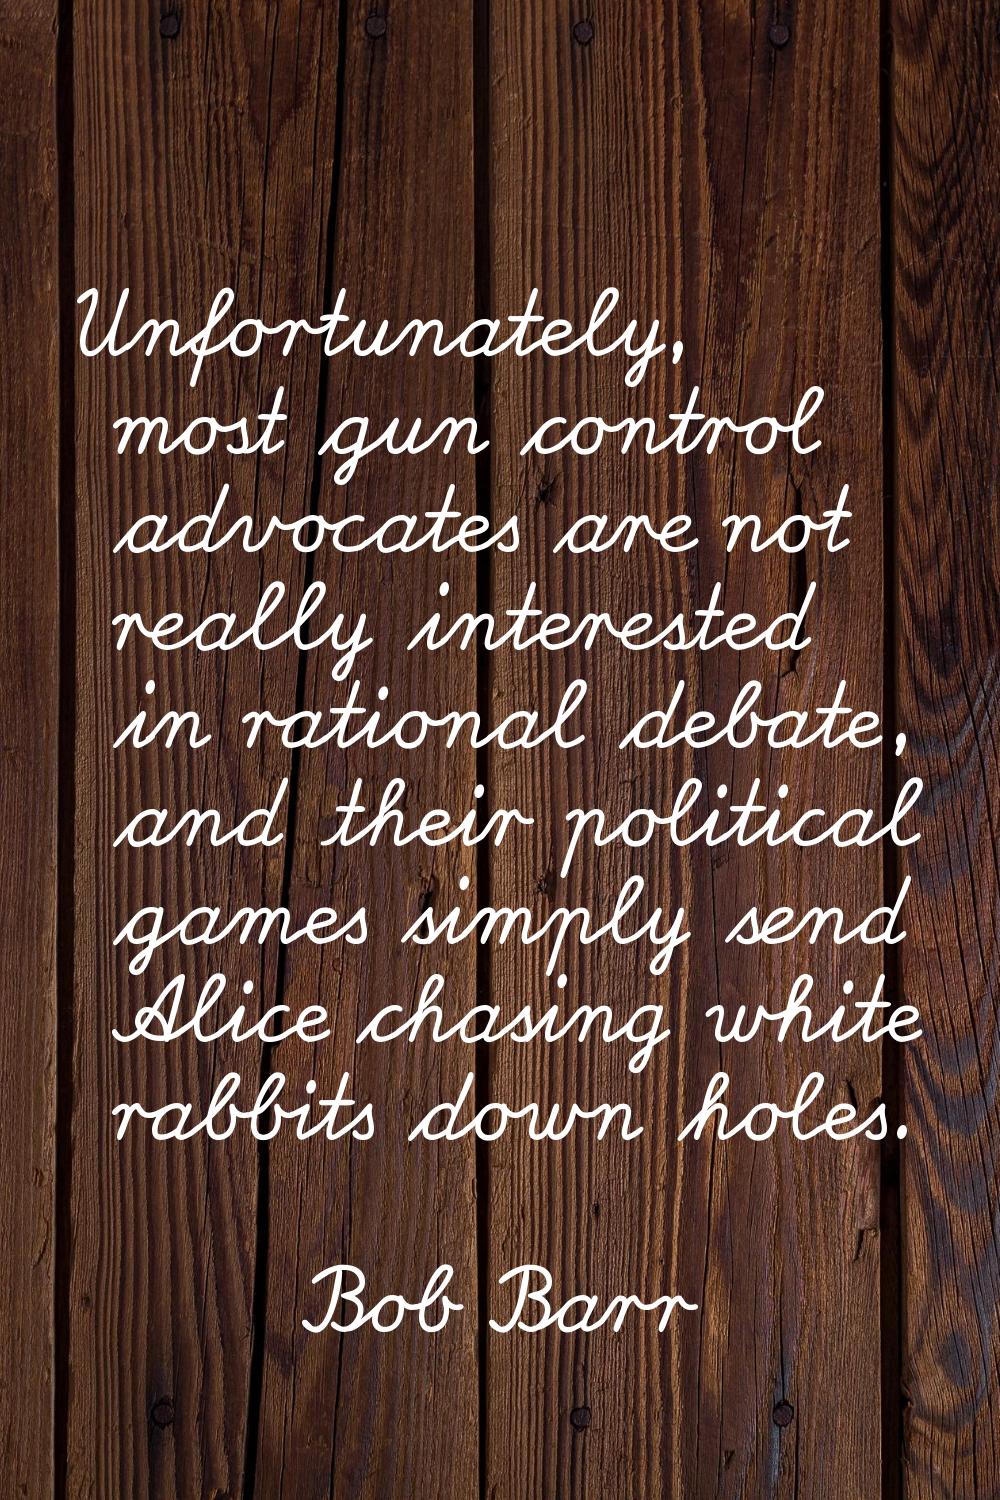 Unfortunately, most gun control advocates are not really interested in rational debate, and their p